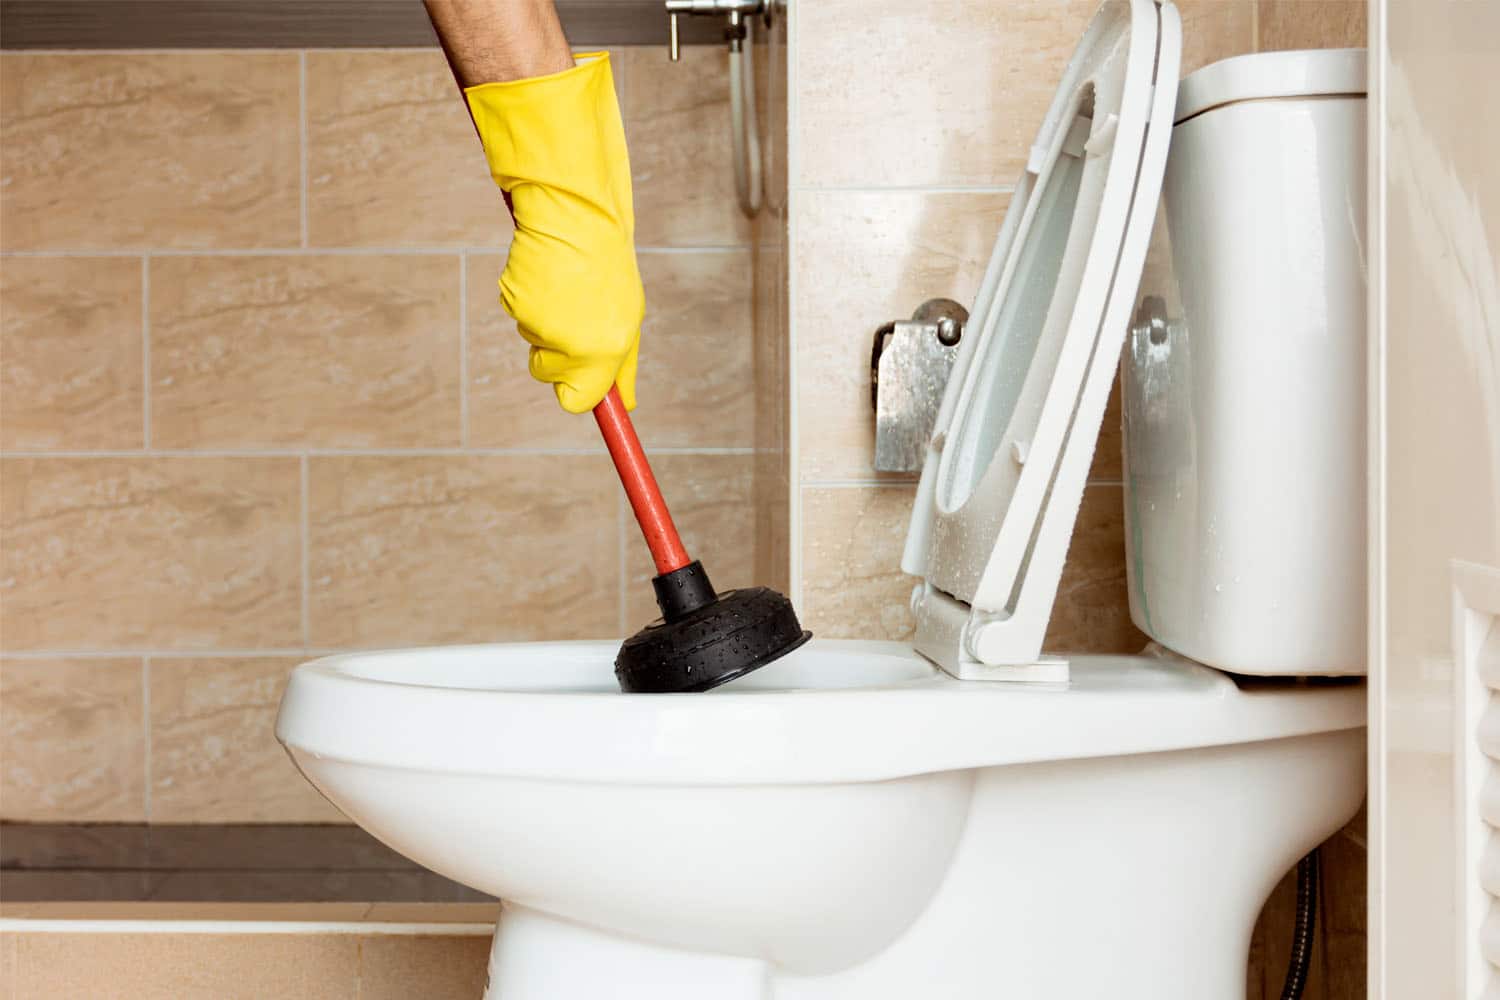 A homeowner is using a plunger to fix their toilet clog